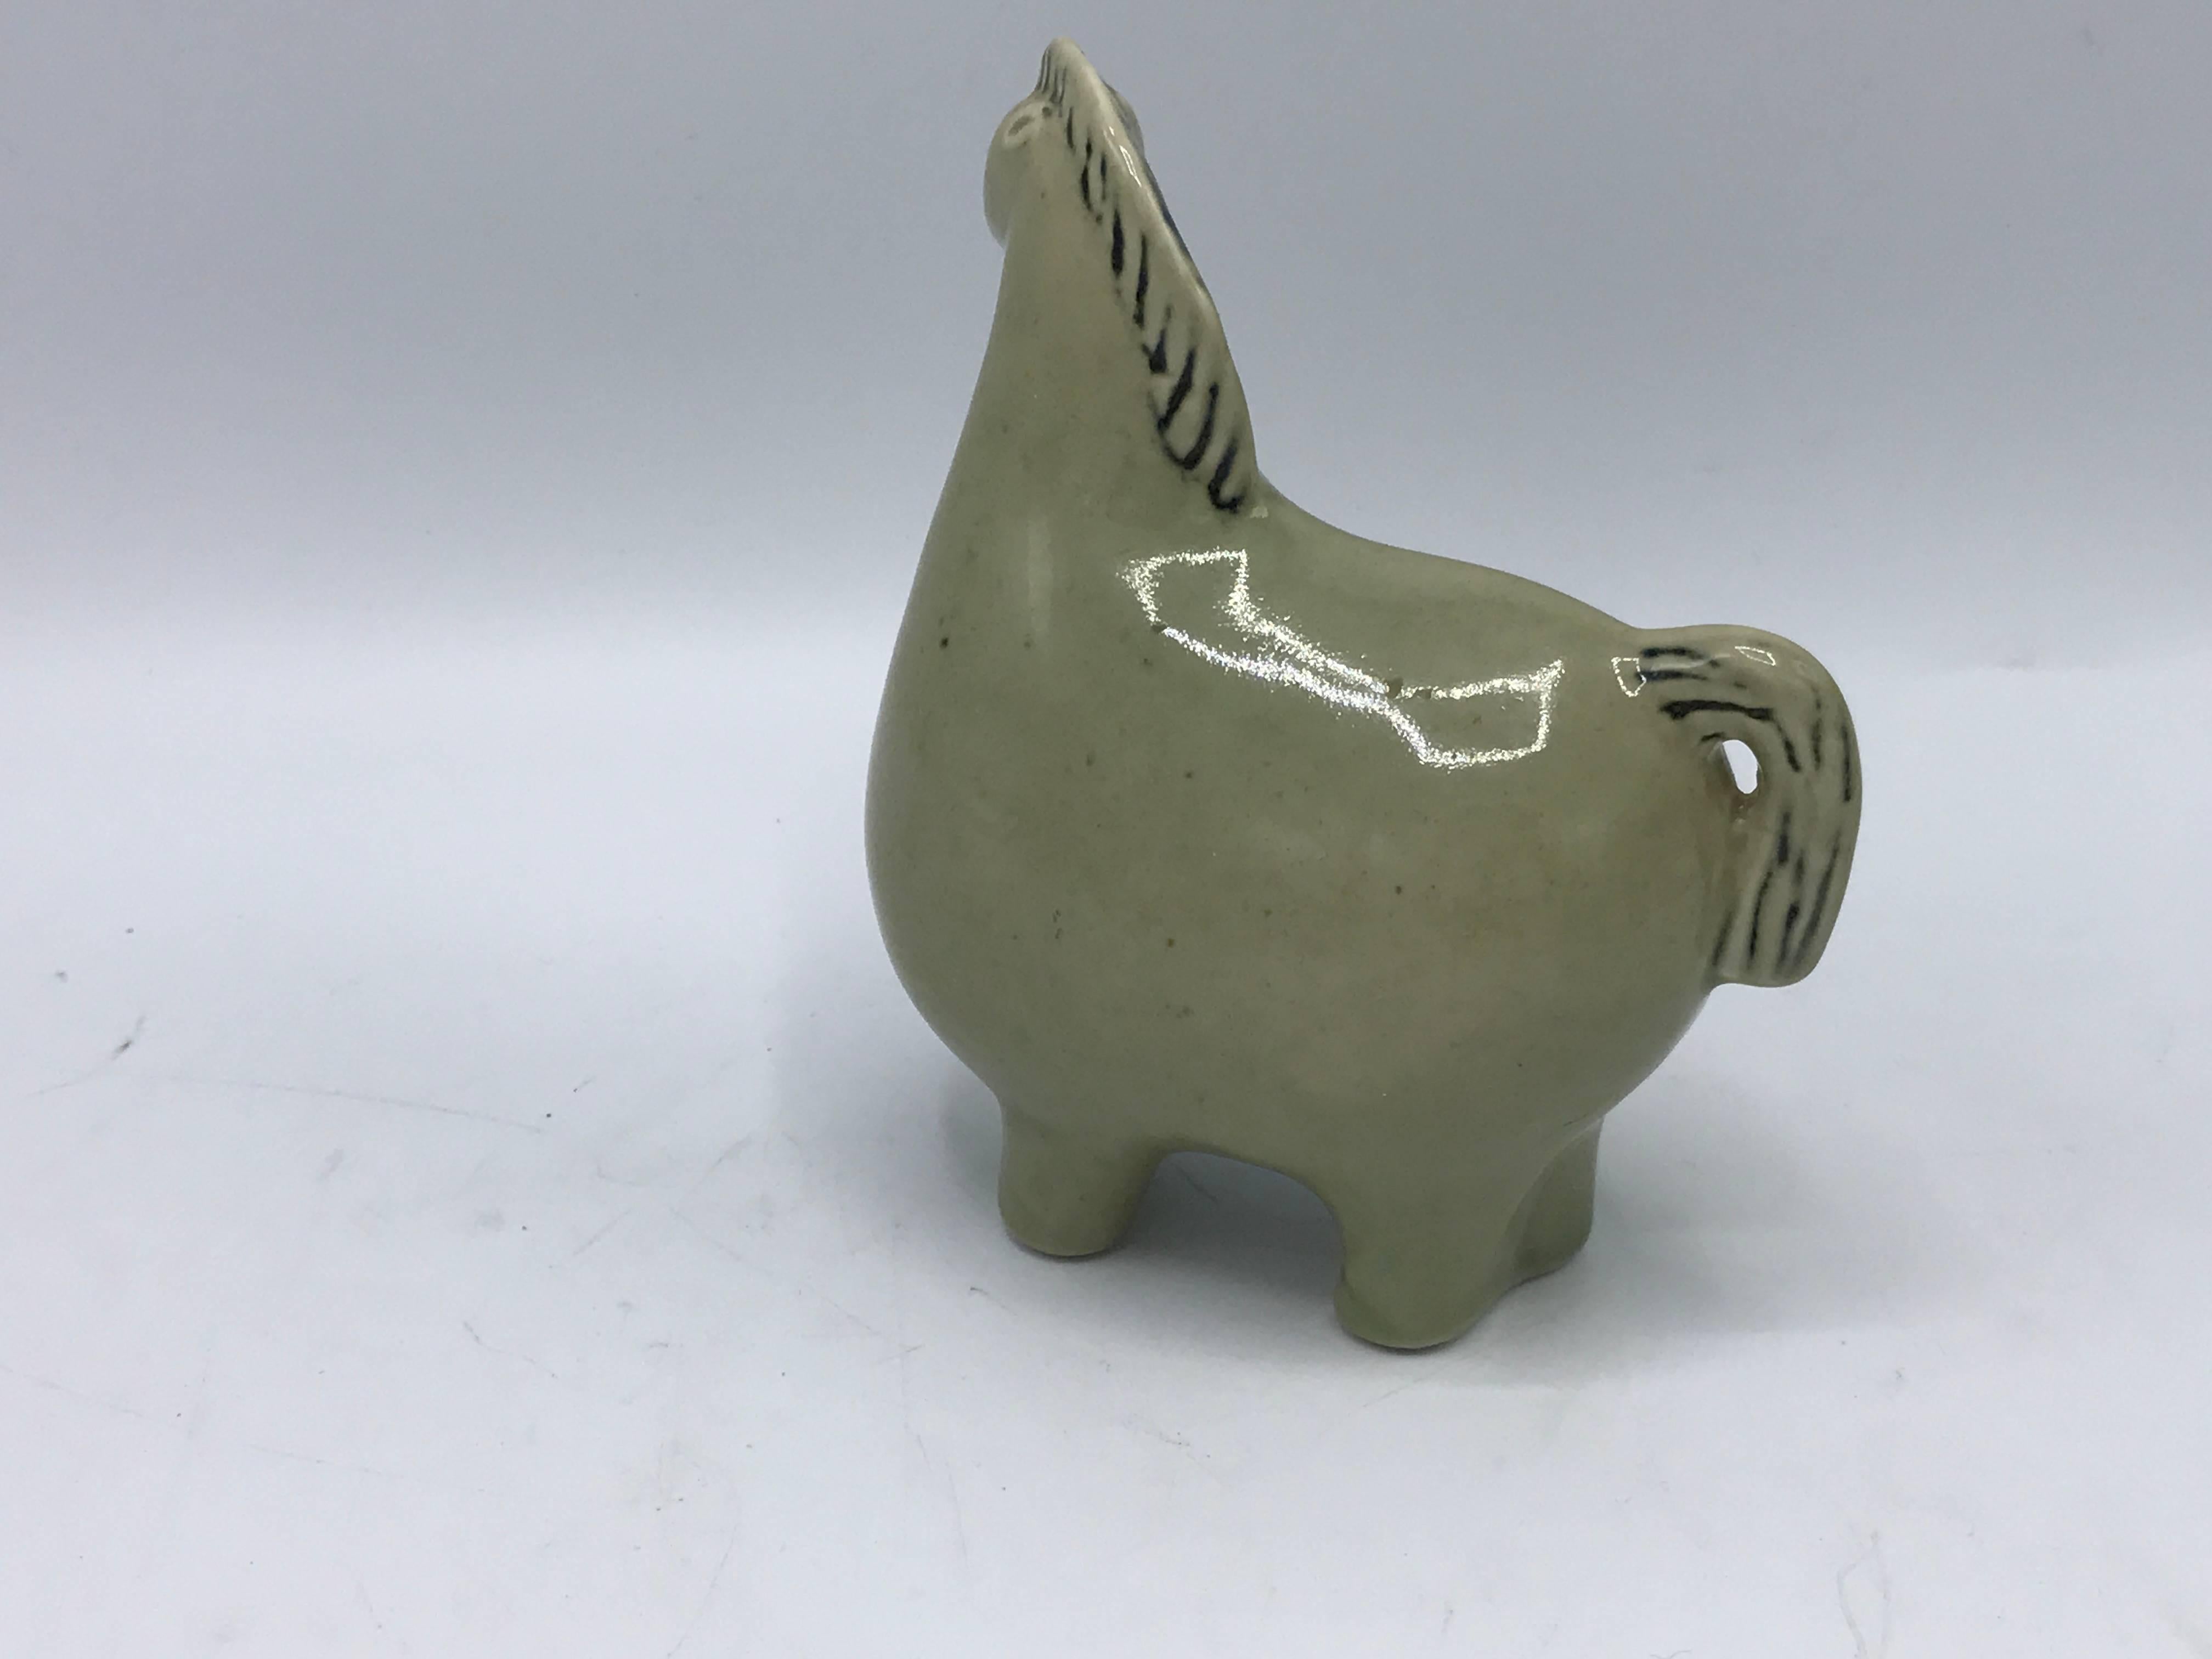 Offered is a stunning and rare, 1950s Stig Lindberg green glazed-ceramic horse sculpture. Marked on underside with original sticker and stamp.